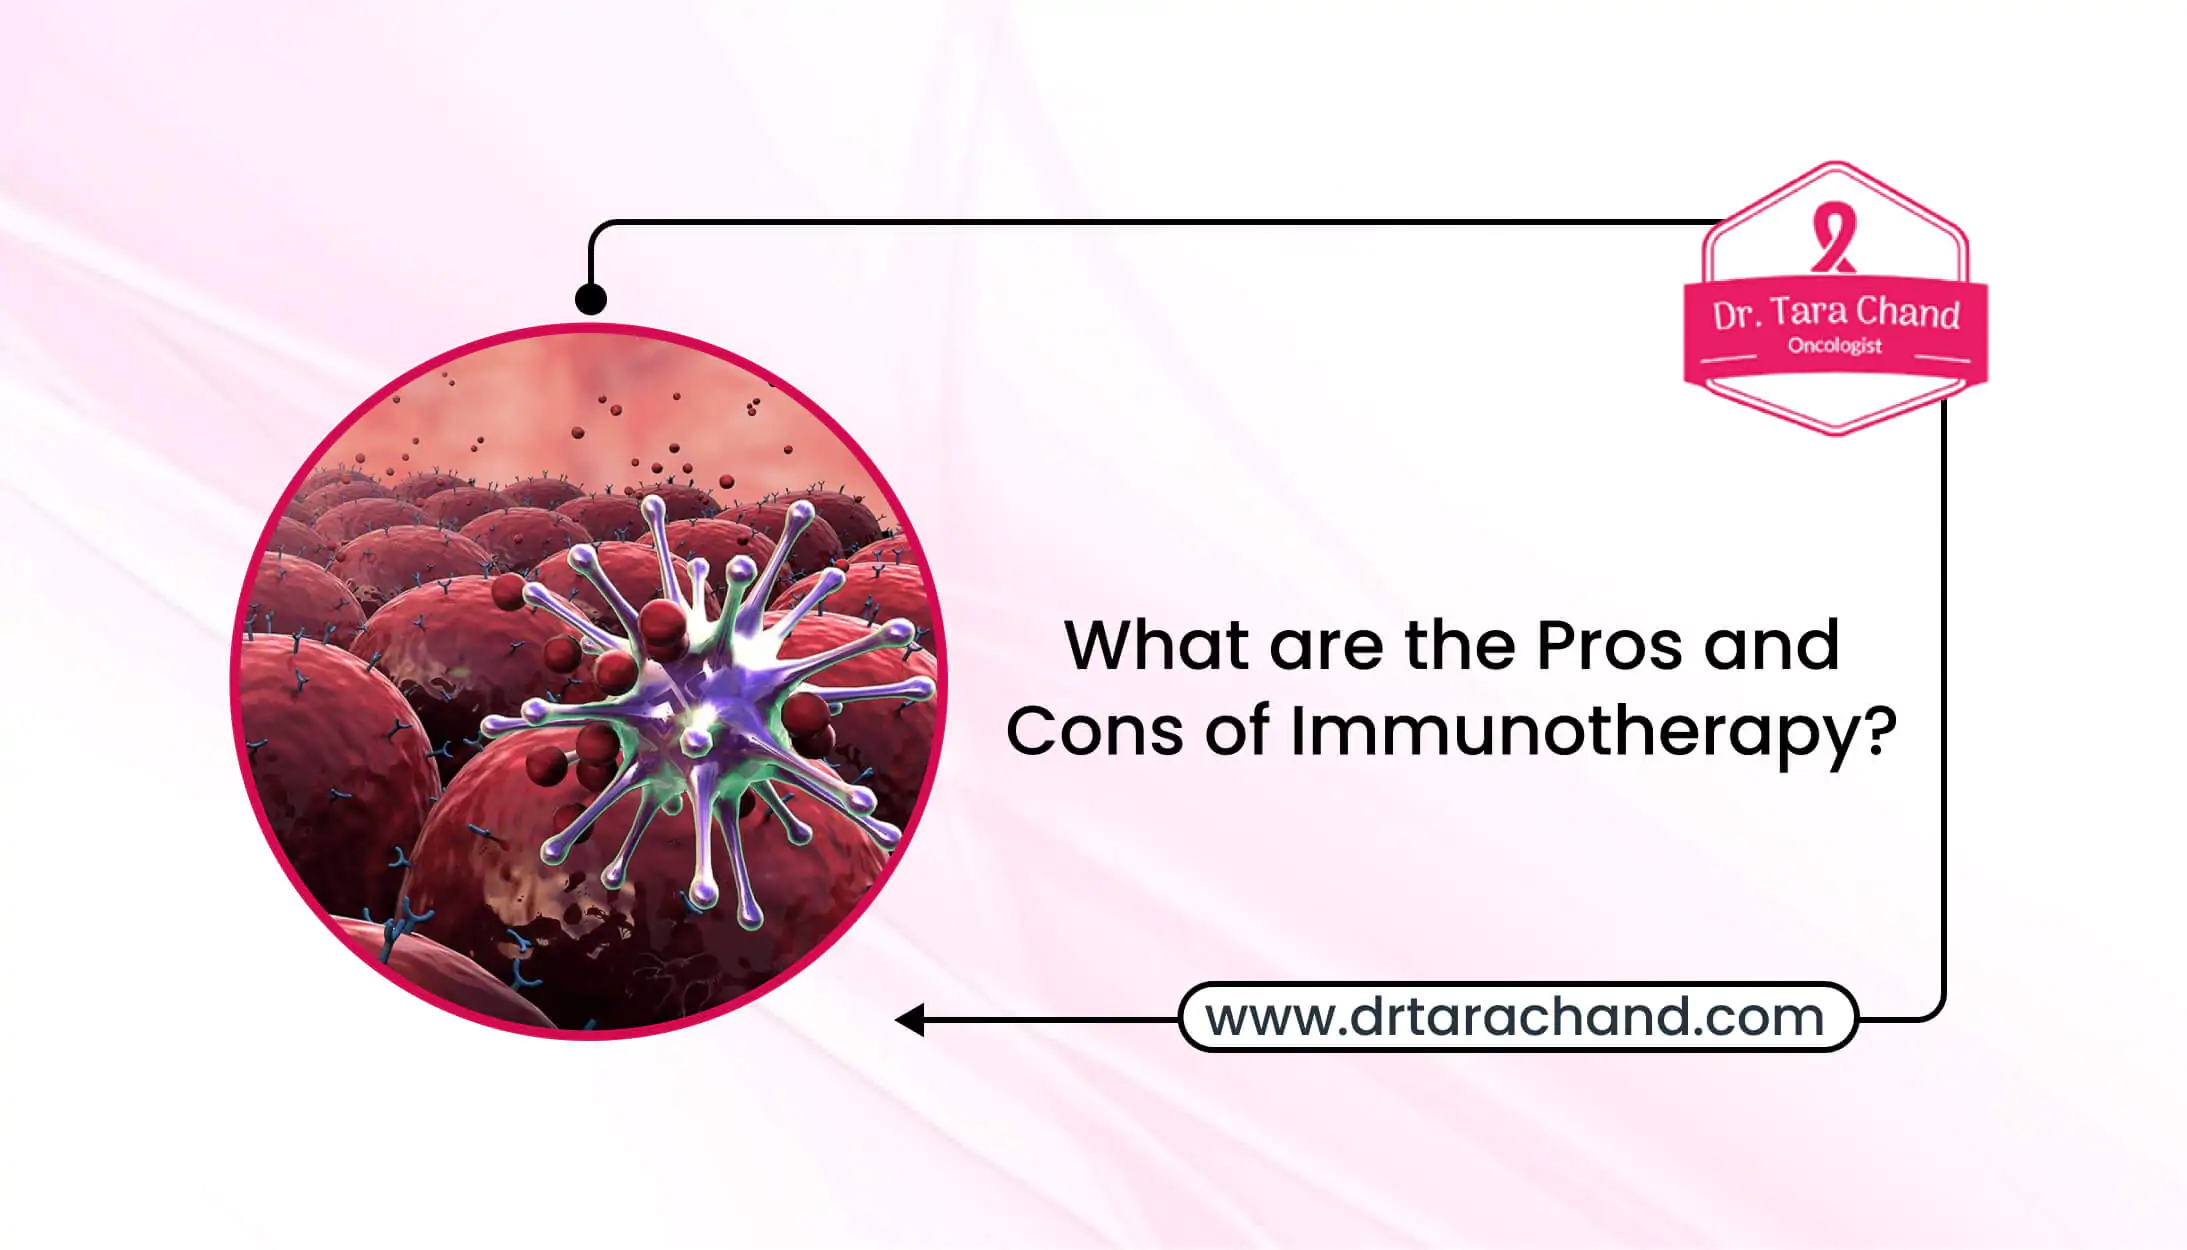 what are the pros and cons of immunothearapy